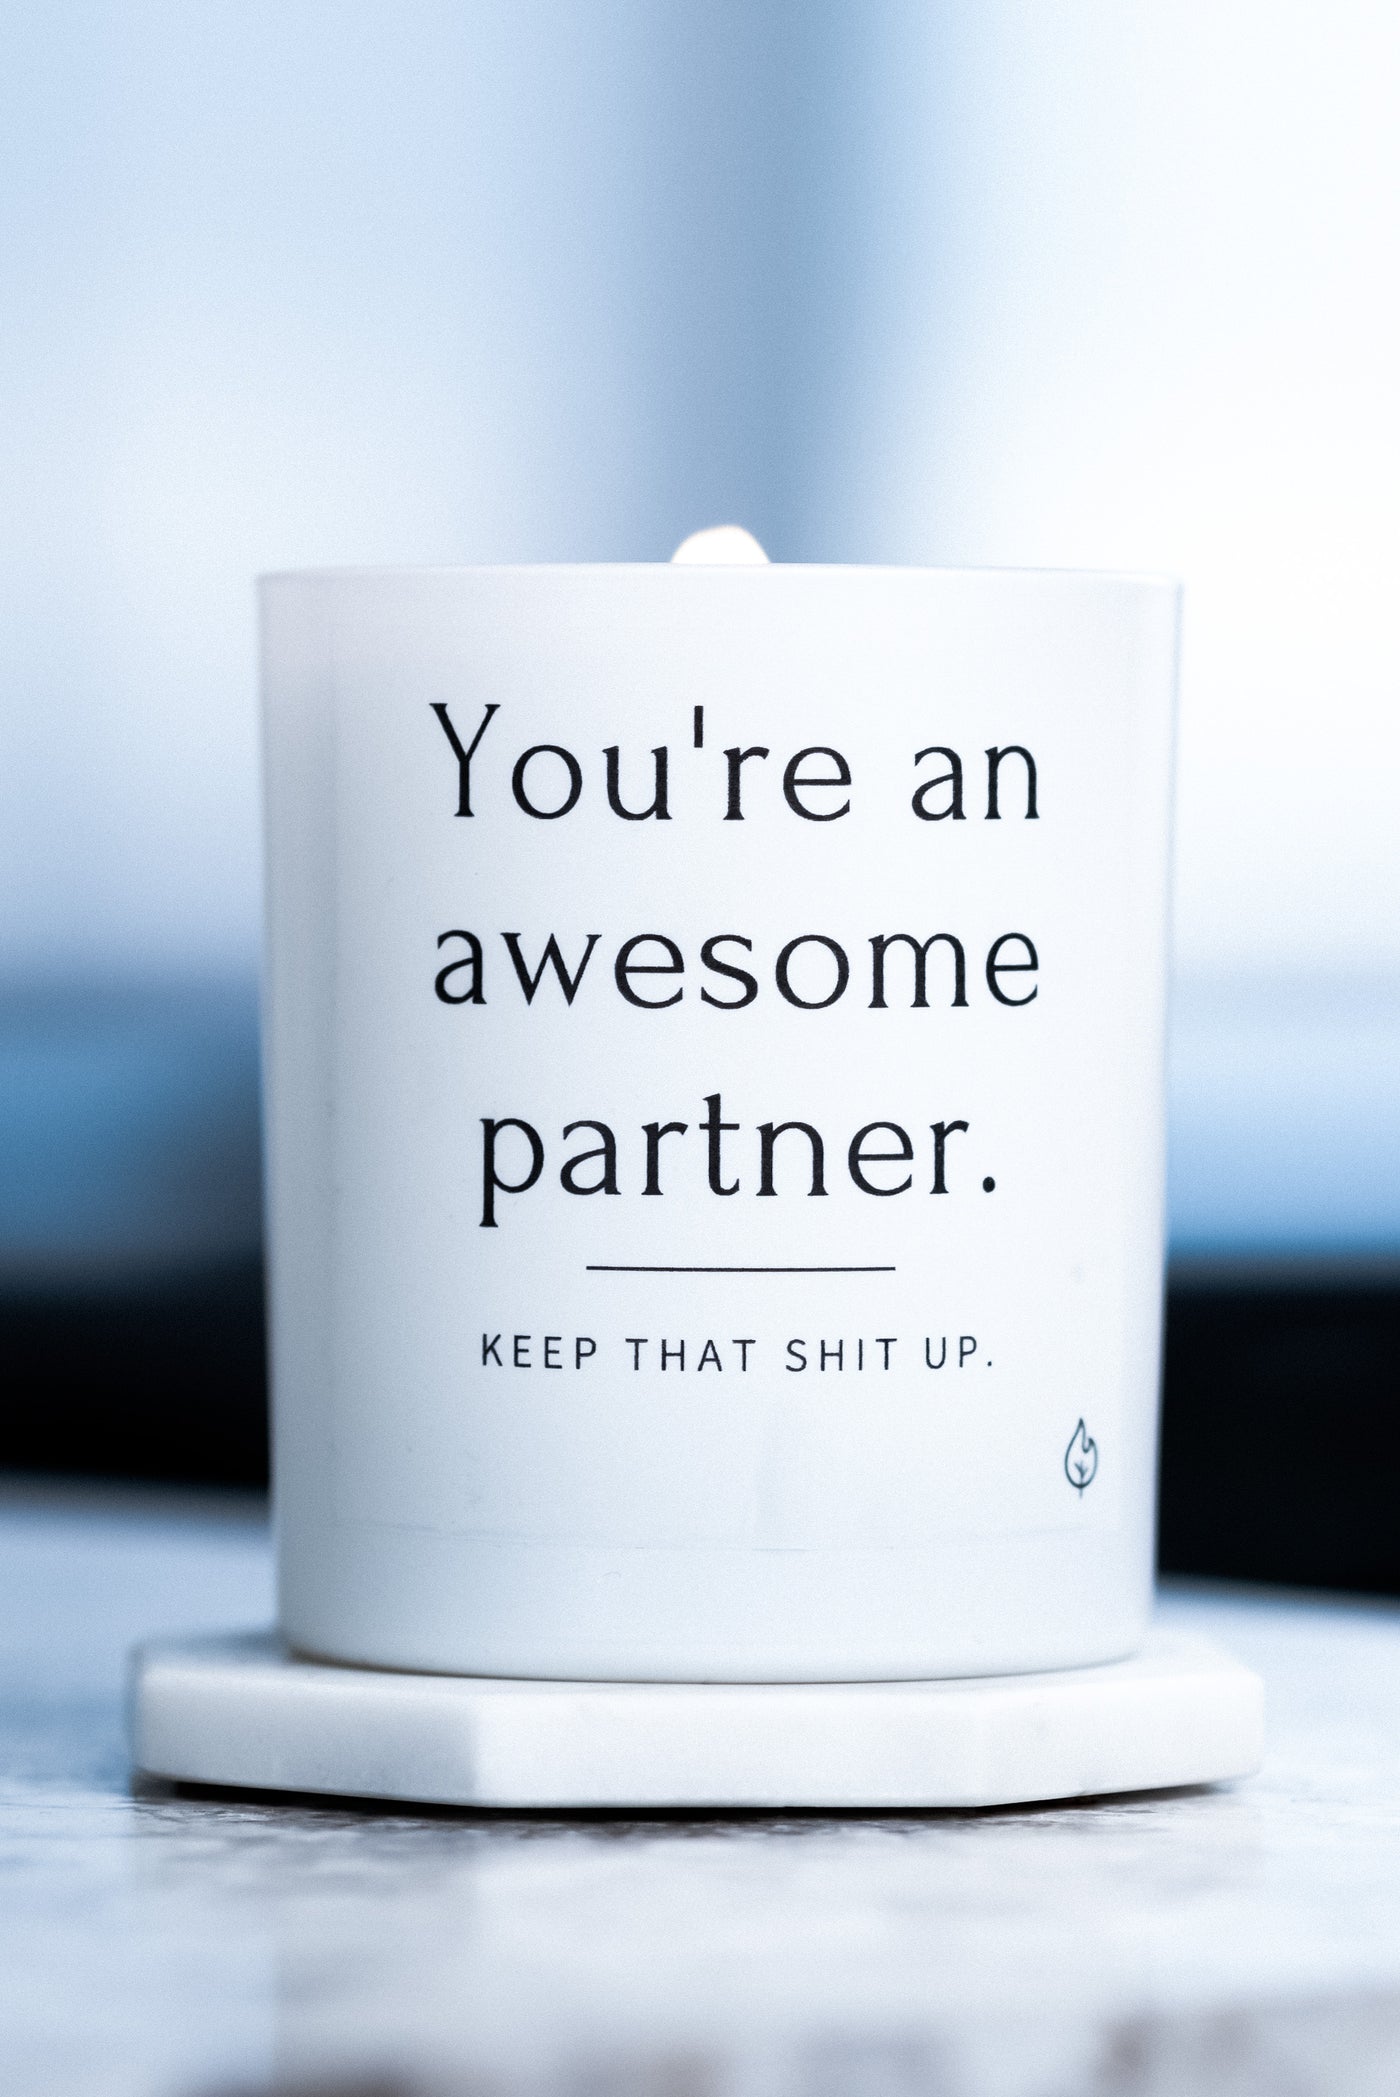 Relationships. You're an awesome...